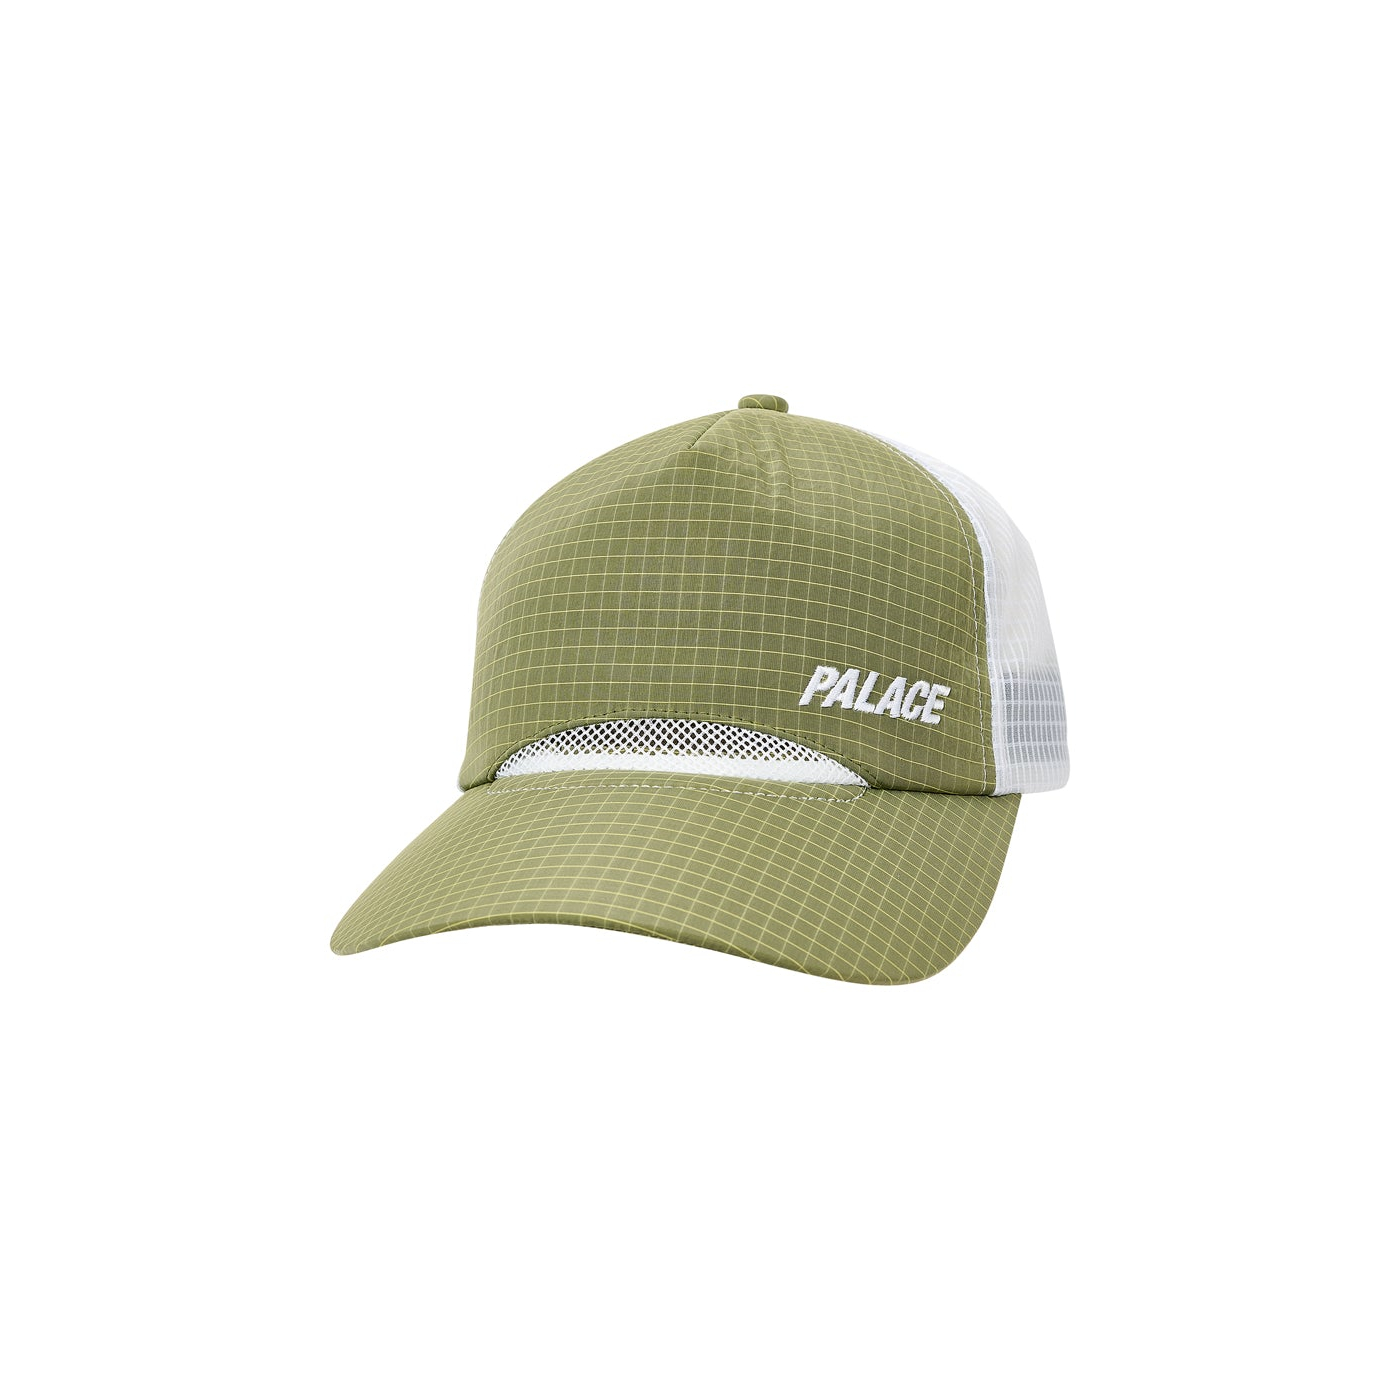 Thumbnail PALTECH TRUCKER LIME one color